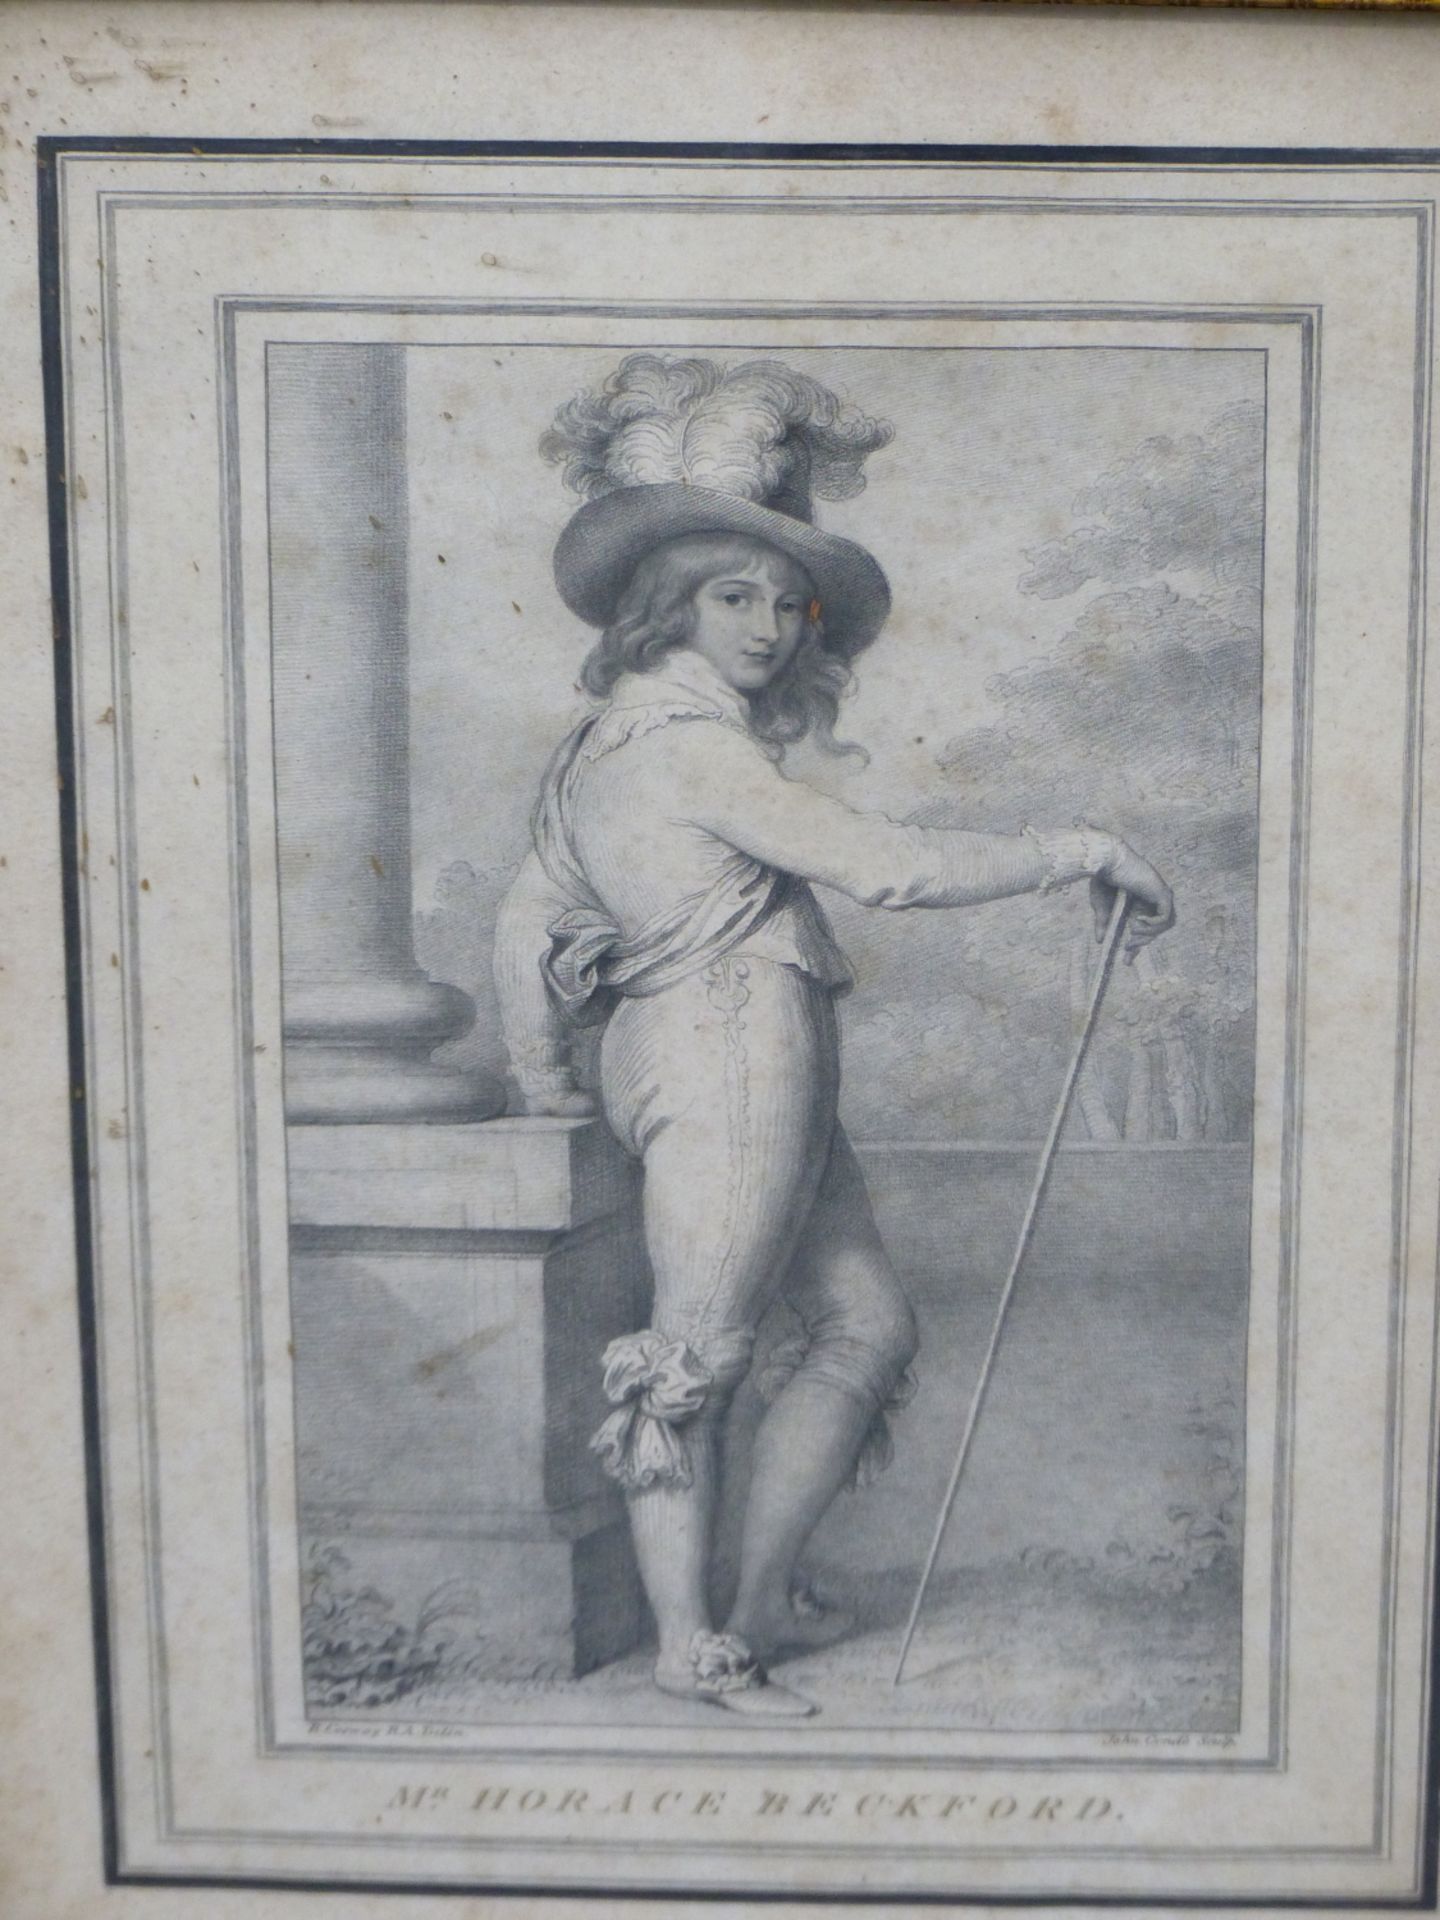 MANNER OF RICHARD COSWAY (1742-1821) STUDY OF MR HORACE BECKFORD WITH WALKING CANE, PENCIL AND - Image 4 of 7